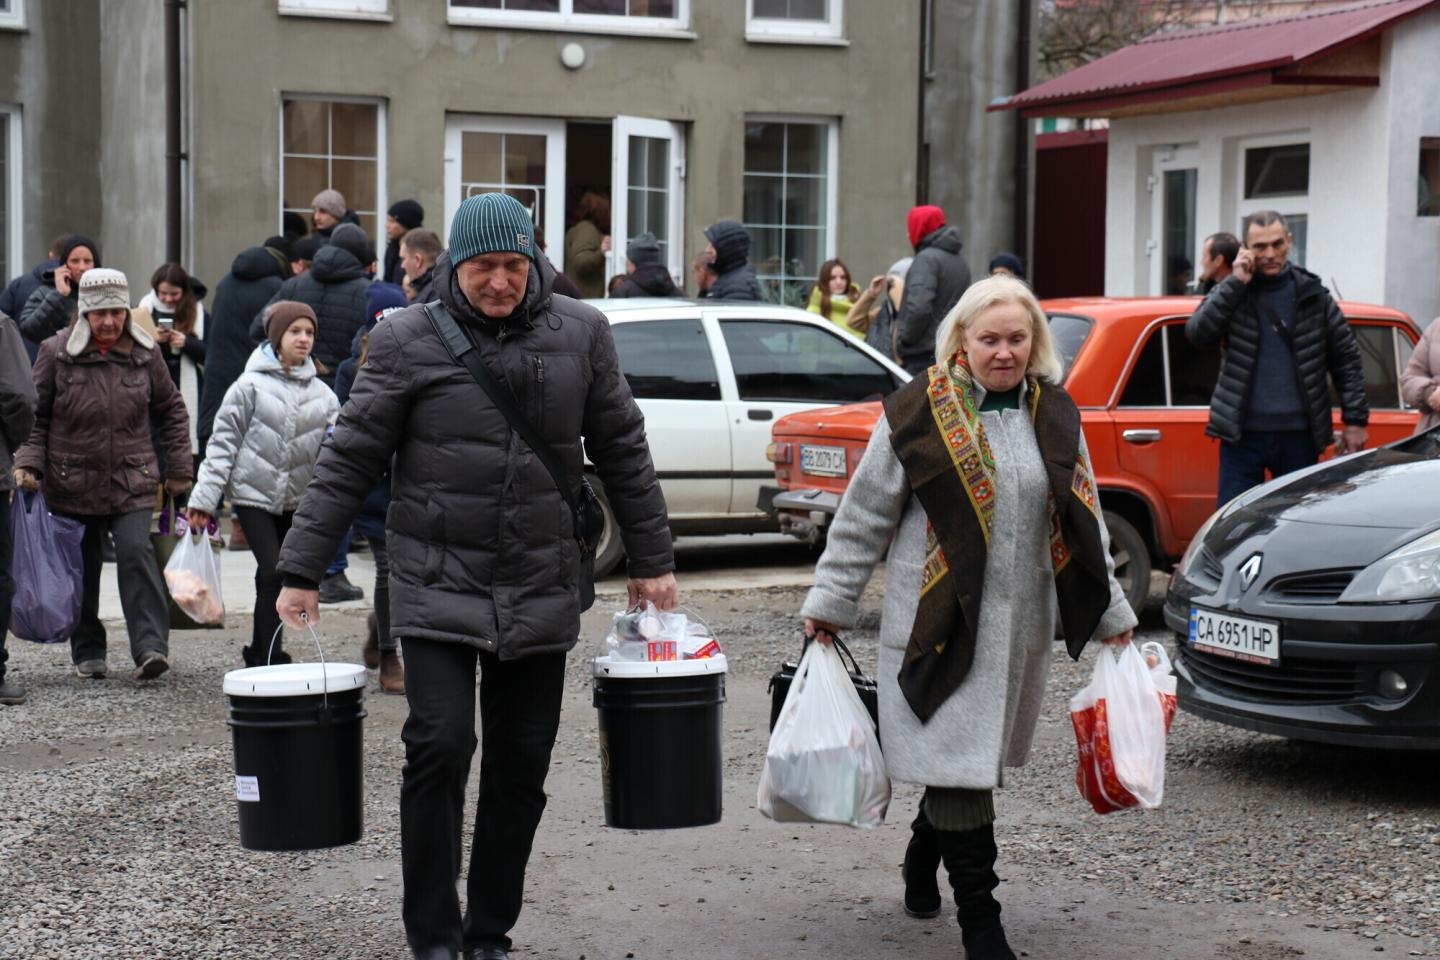 A man and woman walk with relief items including buckets